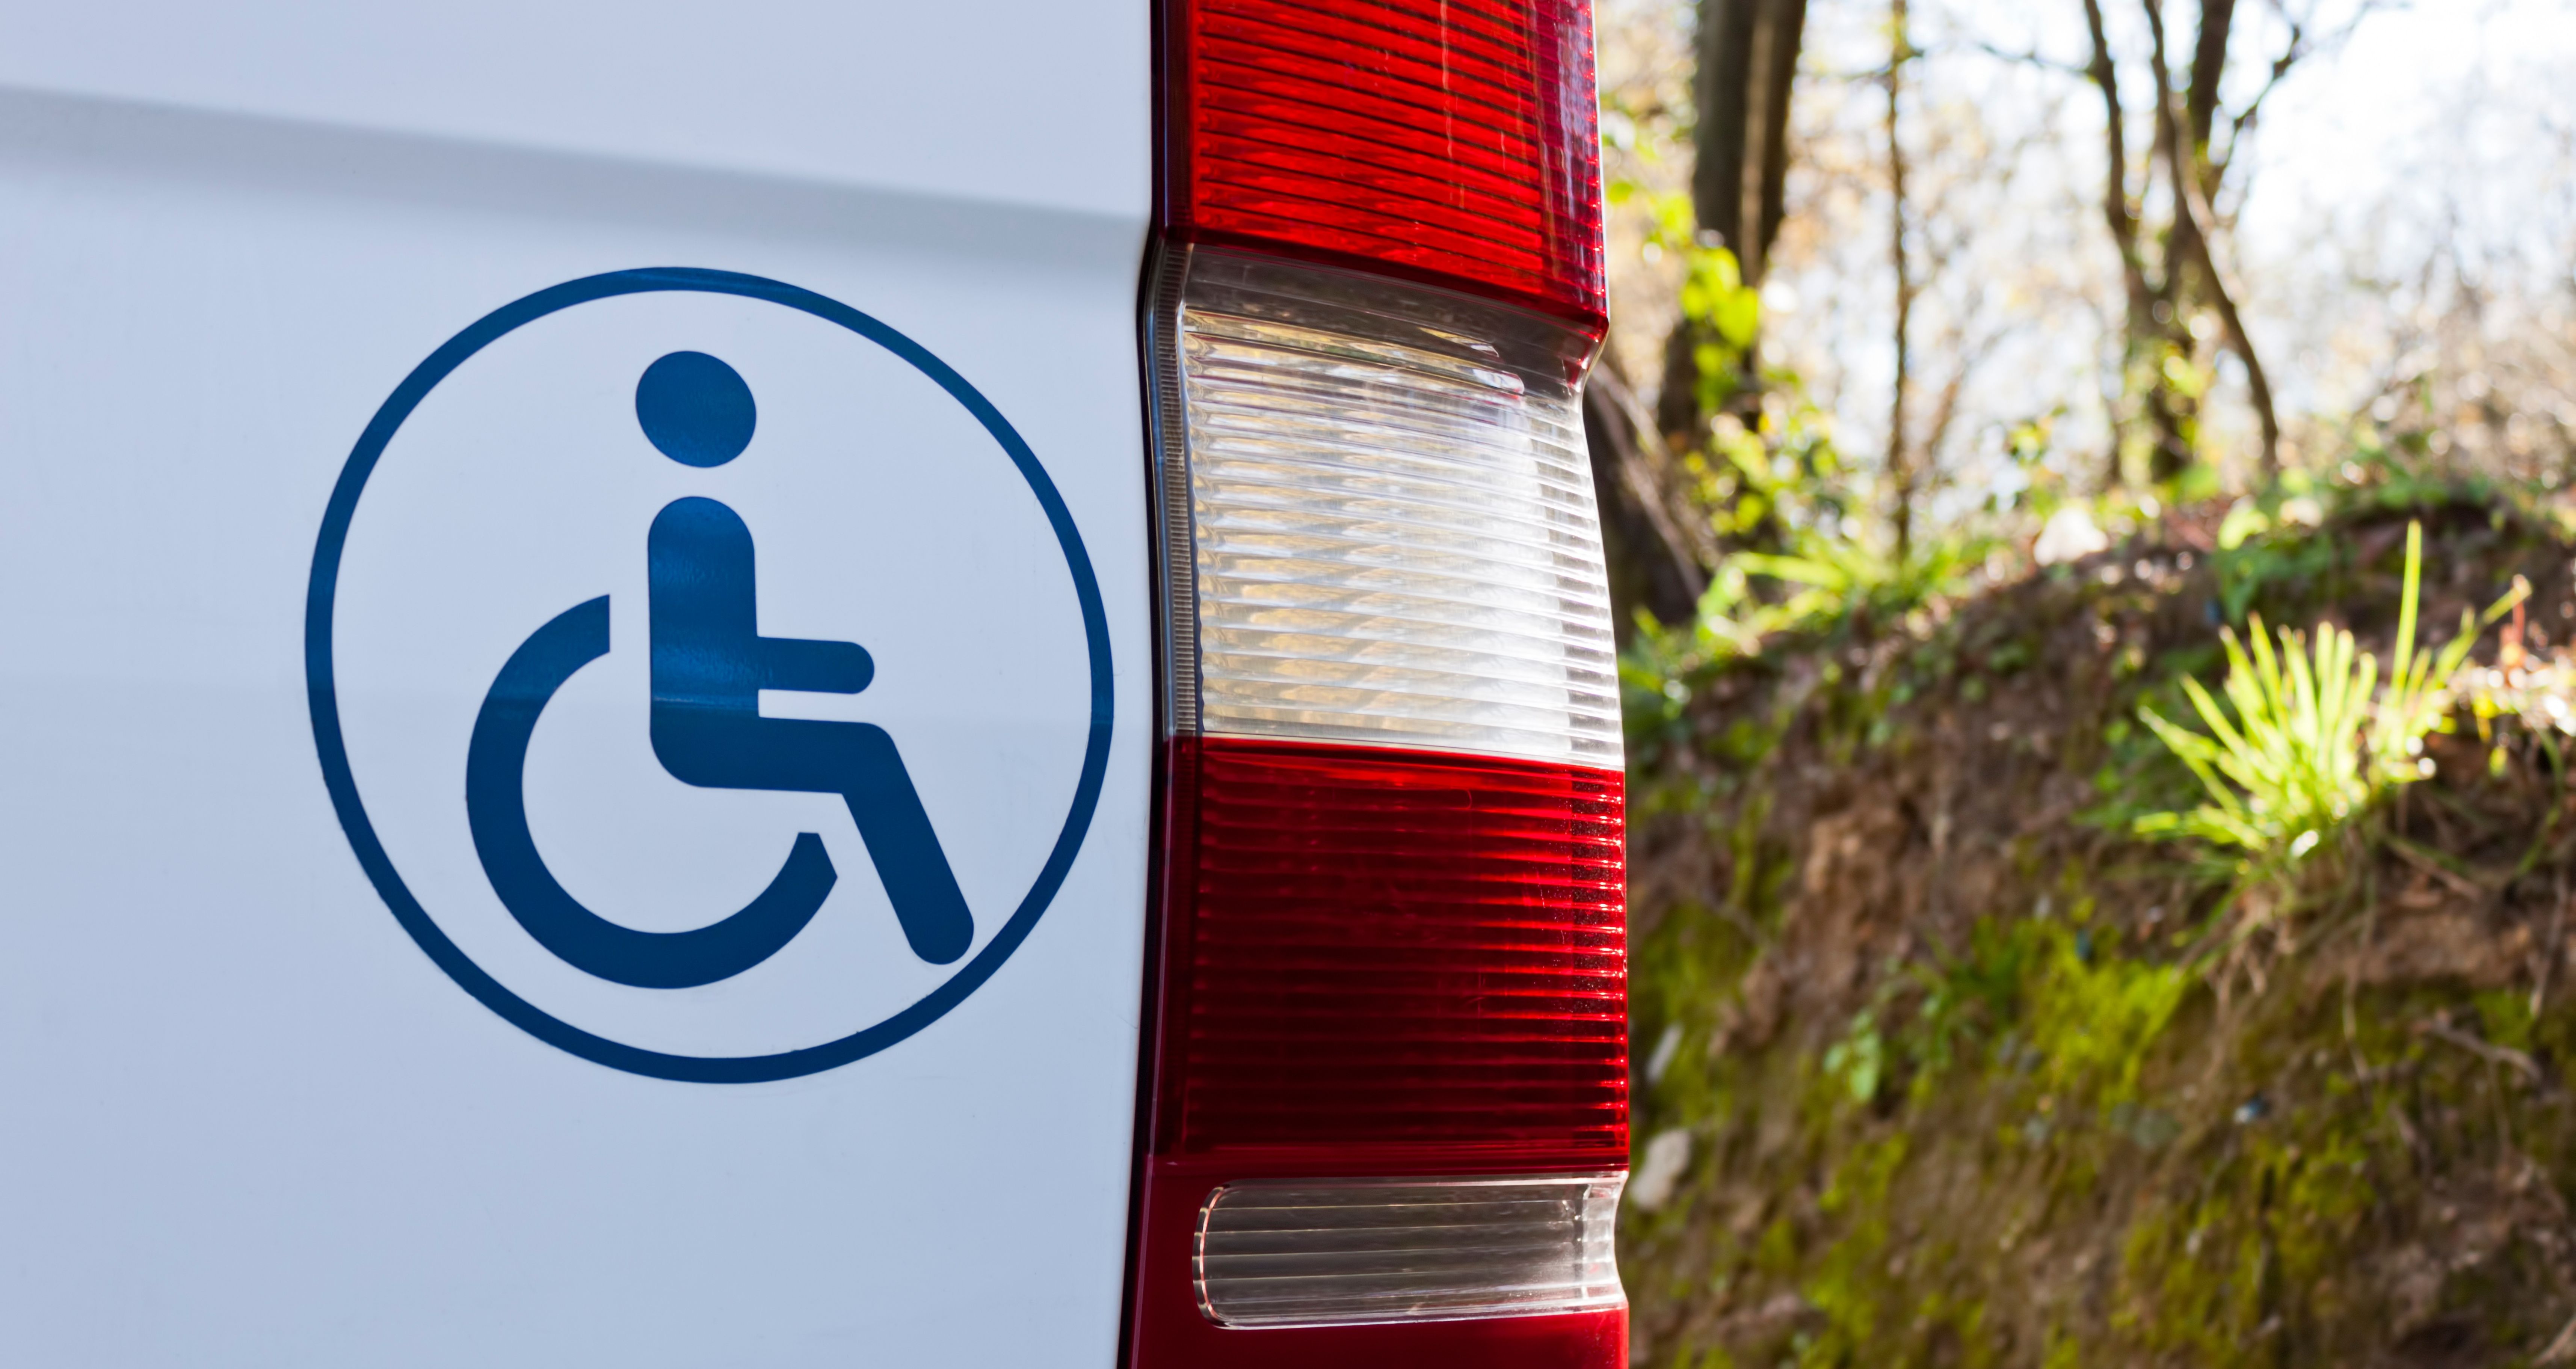 Wheelchair accessible vehicles survey may 2022